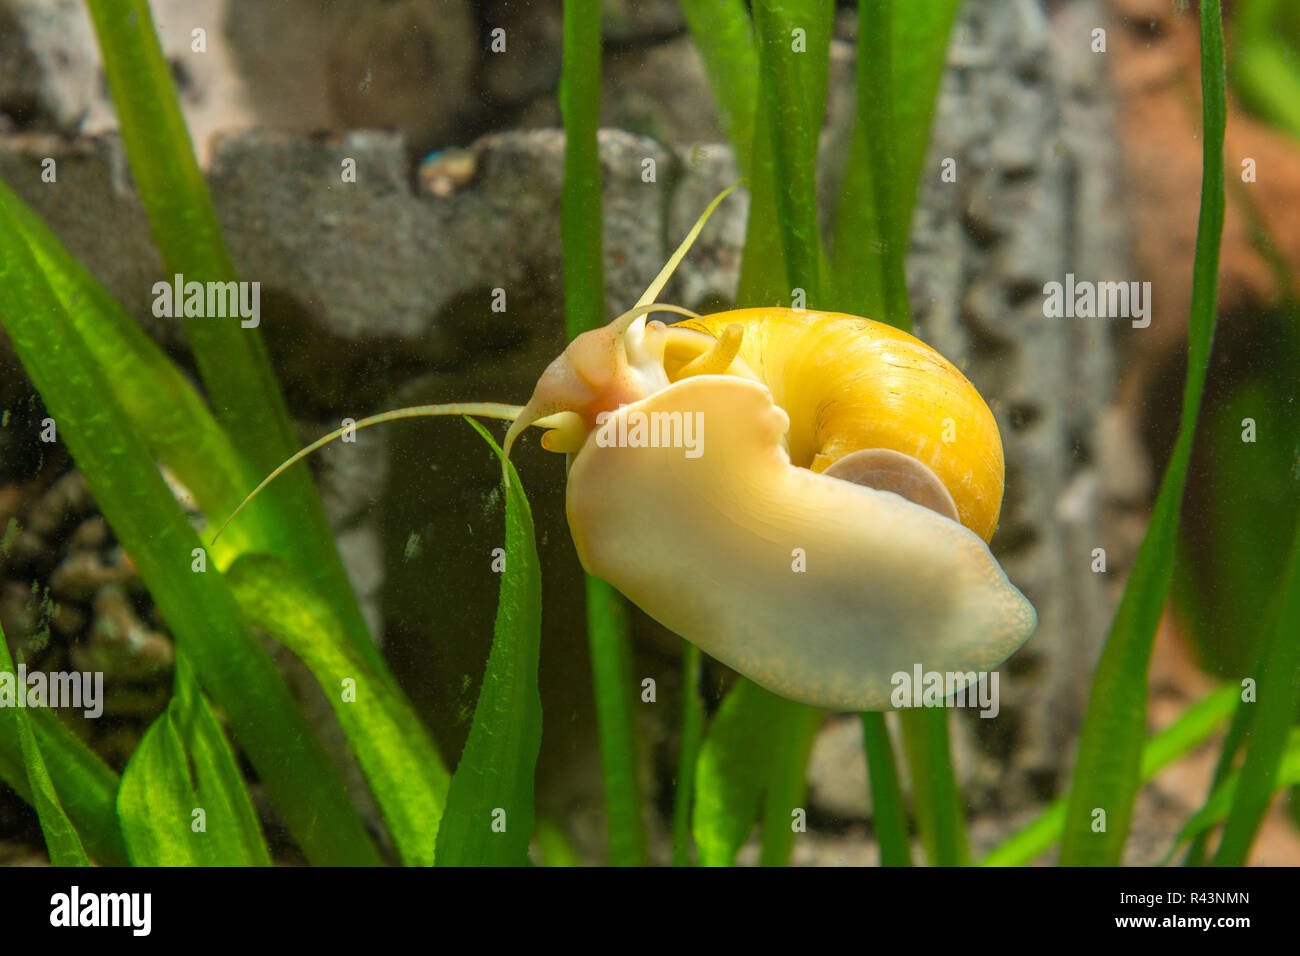 Adult Ampularia snail crawling on the glass of the aquarium Stock Photo